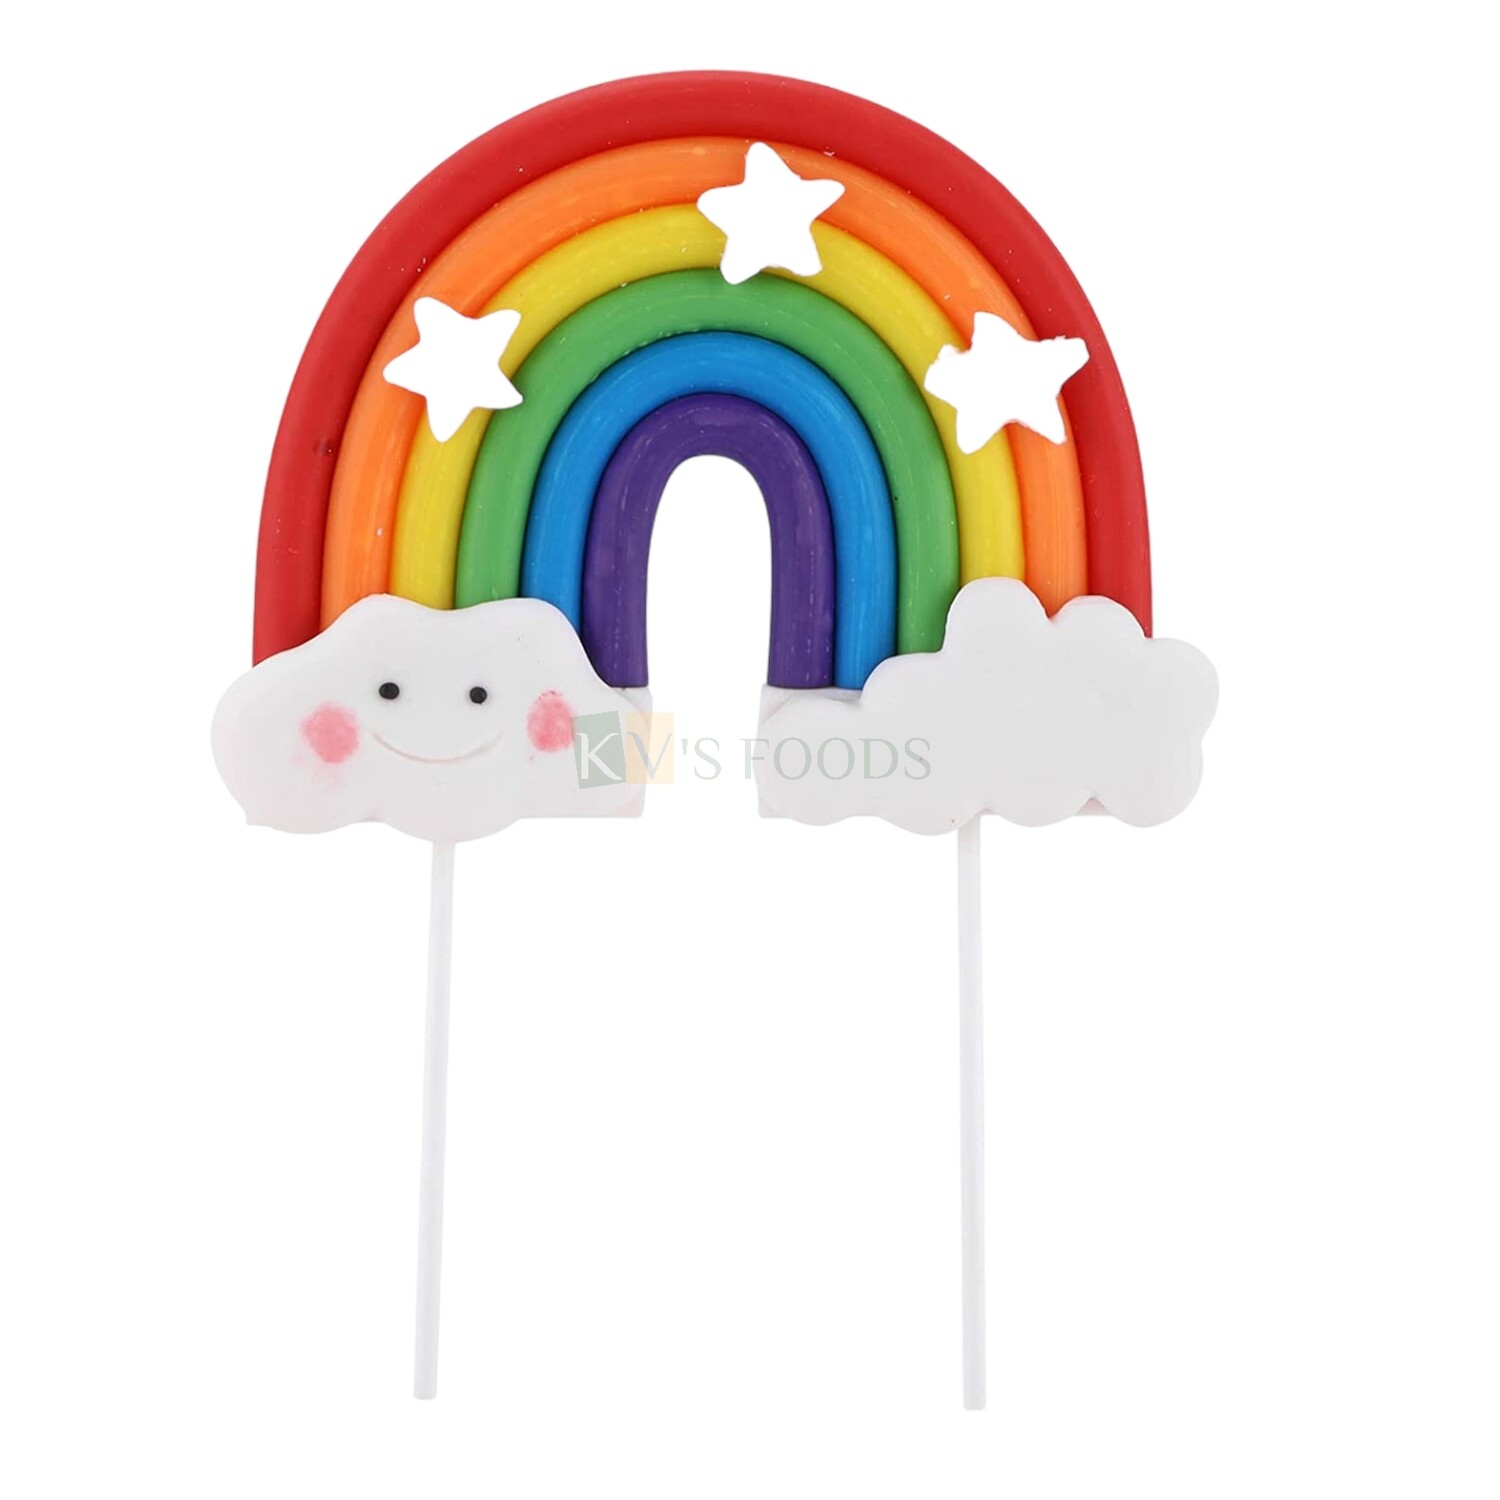 1pc Rainbow with Stars & Smiling Cloud Cake Topper for Unicorn Baby shower Themes, Fondant alike, Cake Topper Insert, Girls, Boys, Friends Bday, Cake Decoration Item, Cake Accessories, DIY Cake Decor